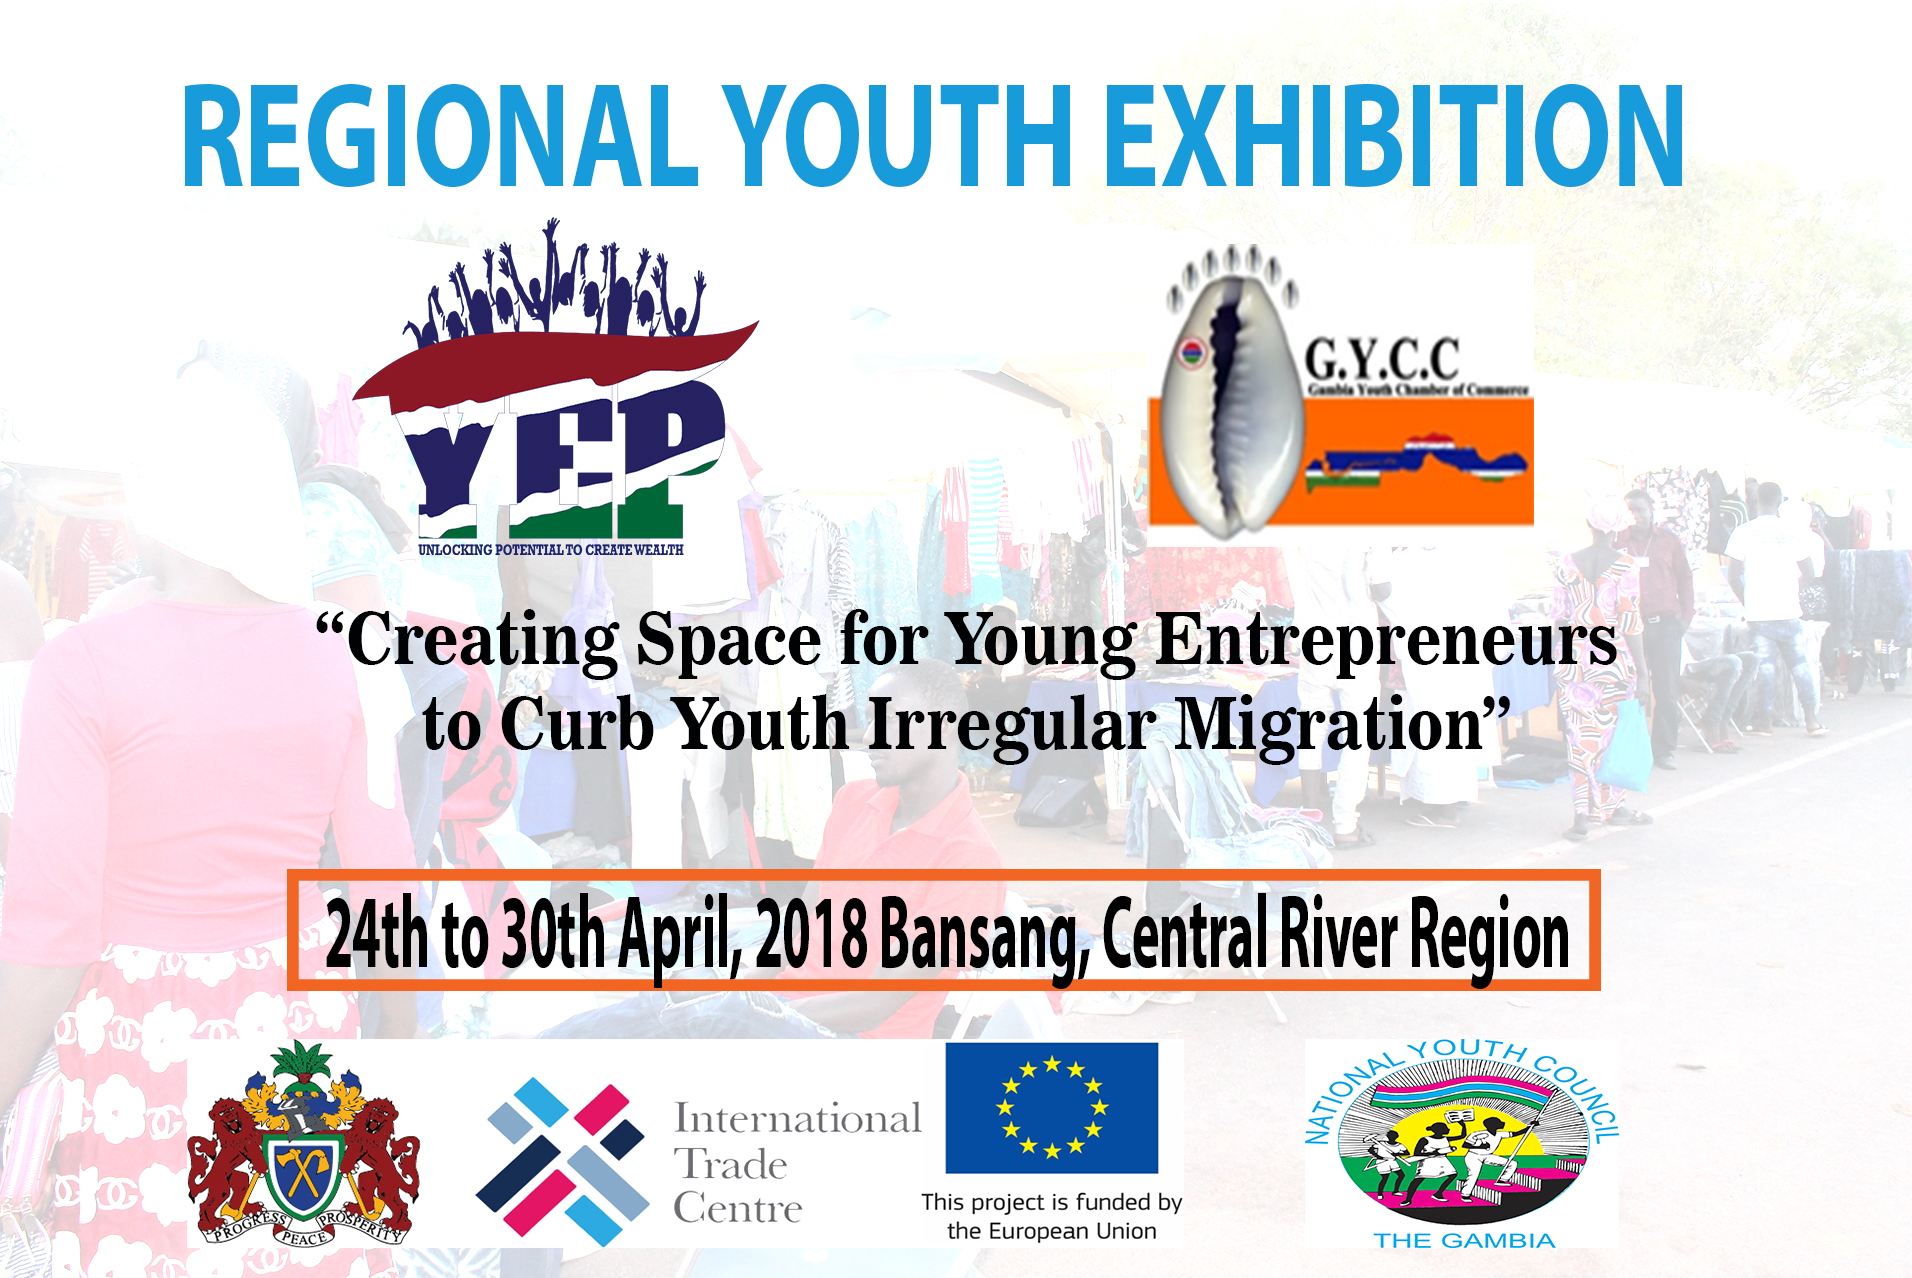 REGIONAL YOUTH EXHIBITION